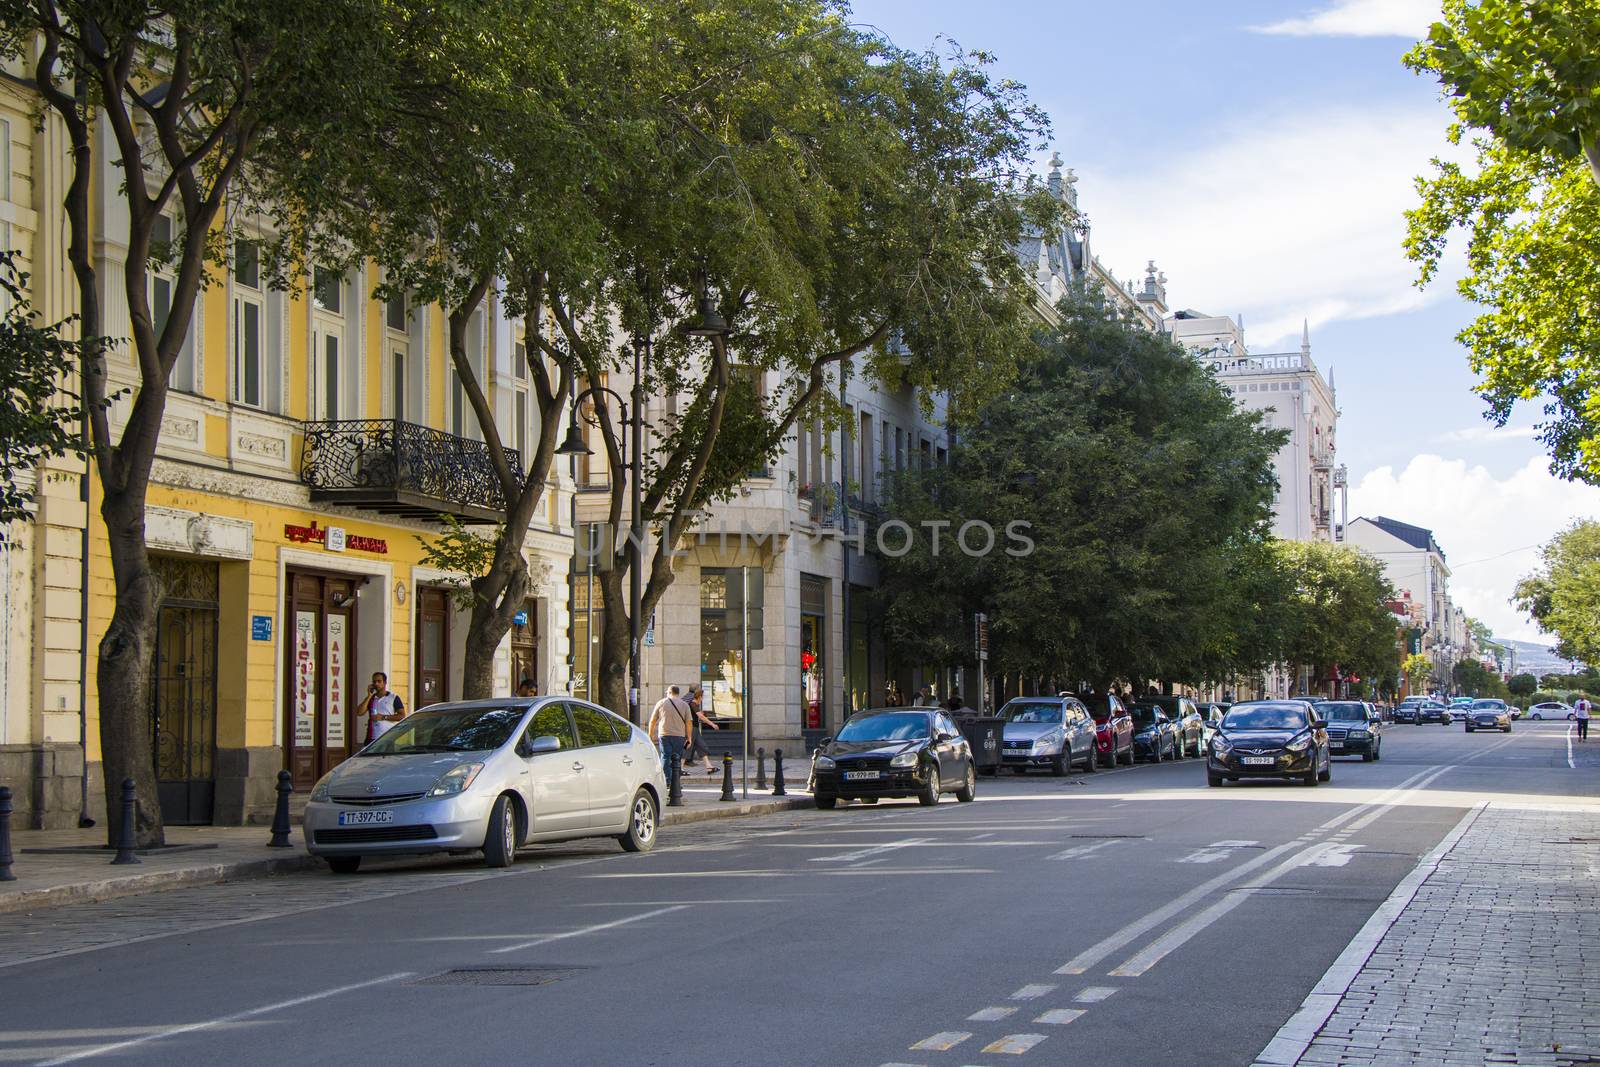 Tbilisi city center, street situation, people, cars and buildings. by Taidundua